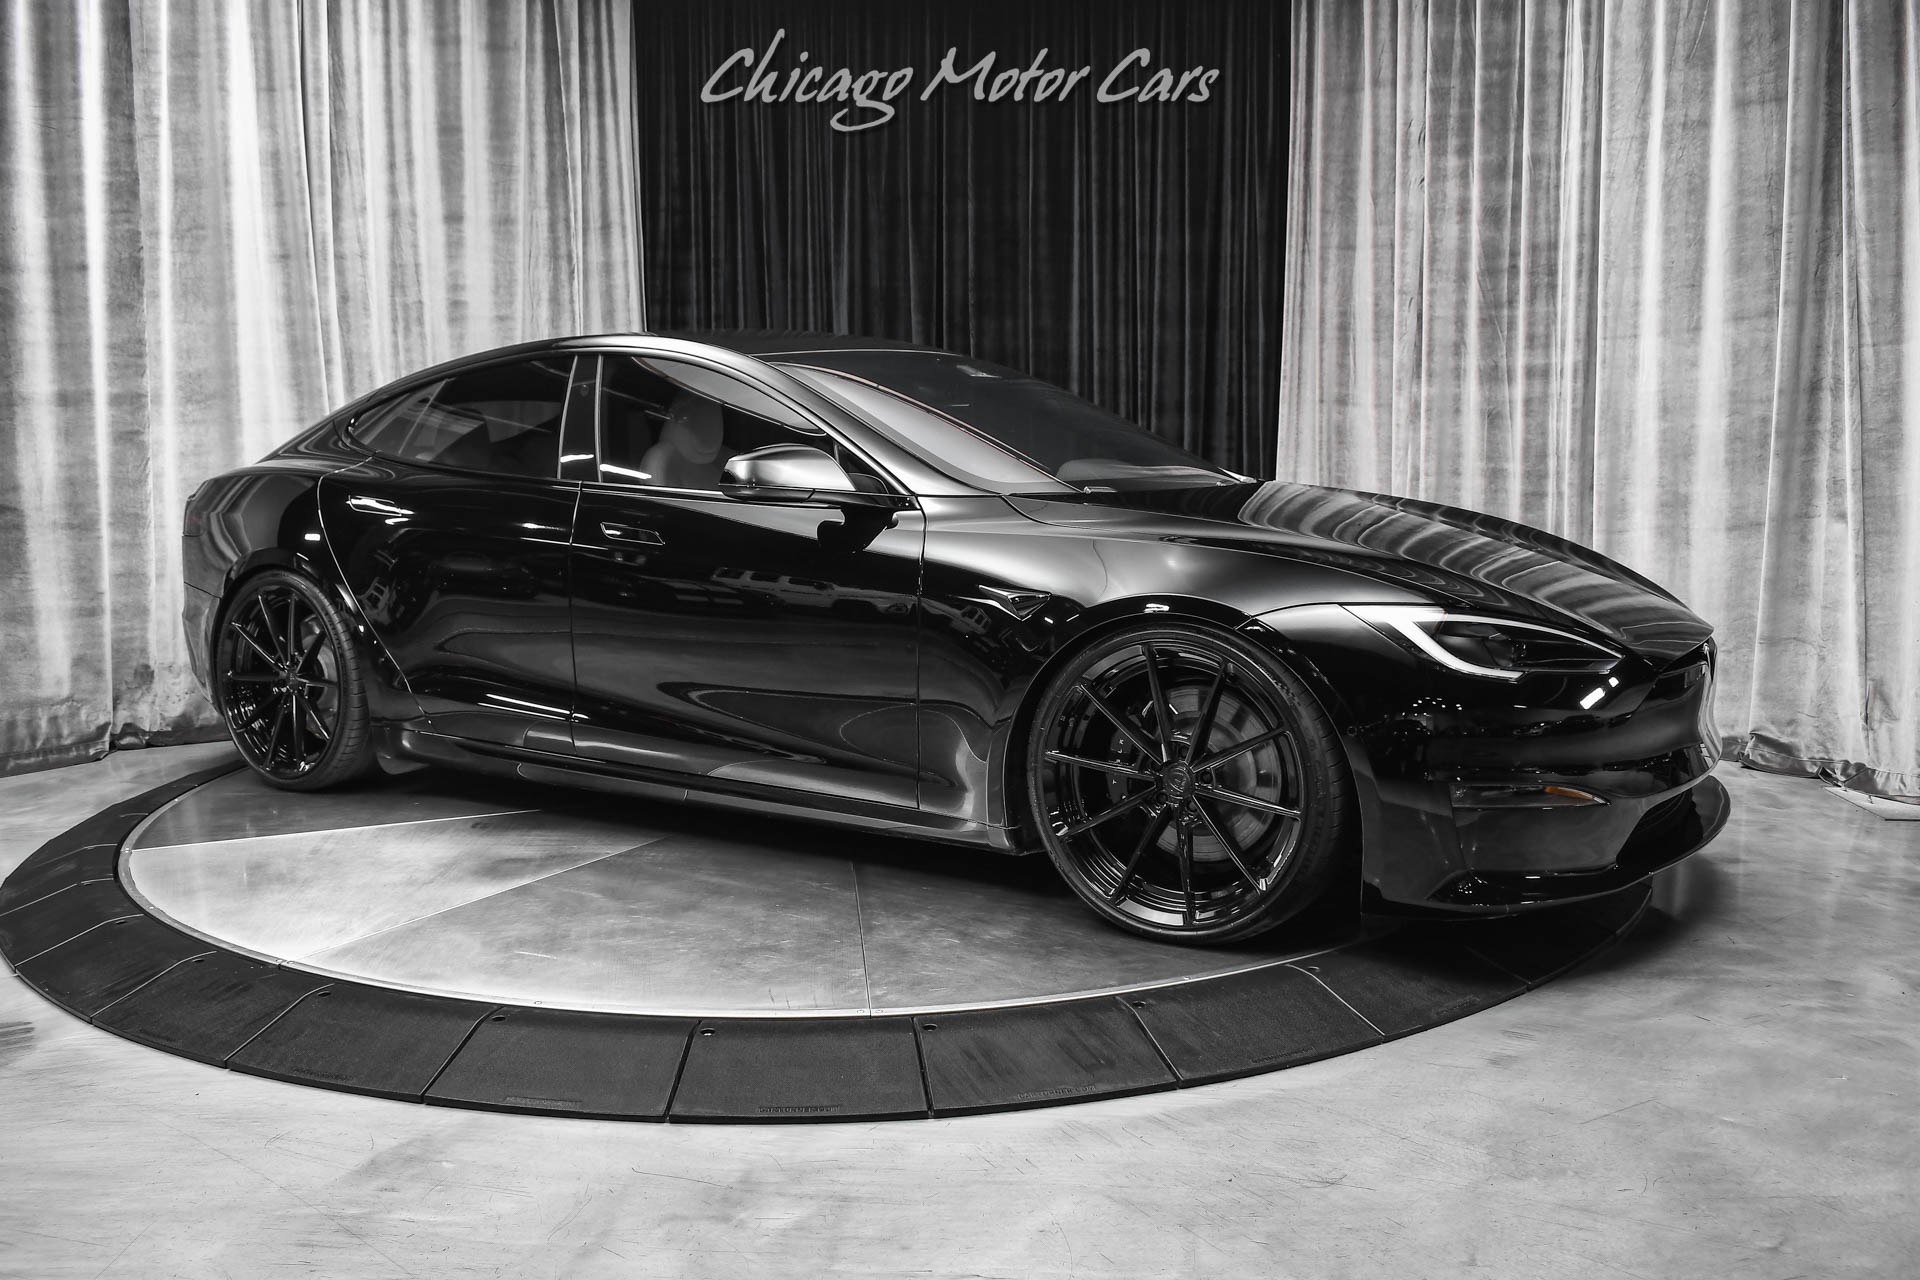 Used 2022 Tesla Model S Plaid Carbon Fiber LOADED Autopilot ANRKY Wheels!  Lowered! FULL Front PPF! For Sale (Special Pricing) | Chicago Motor Cars  Stock #19576